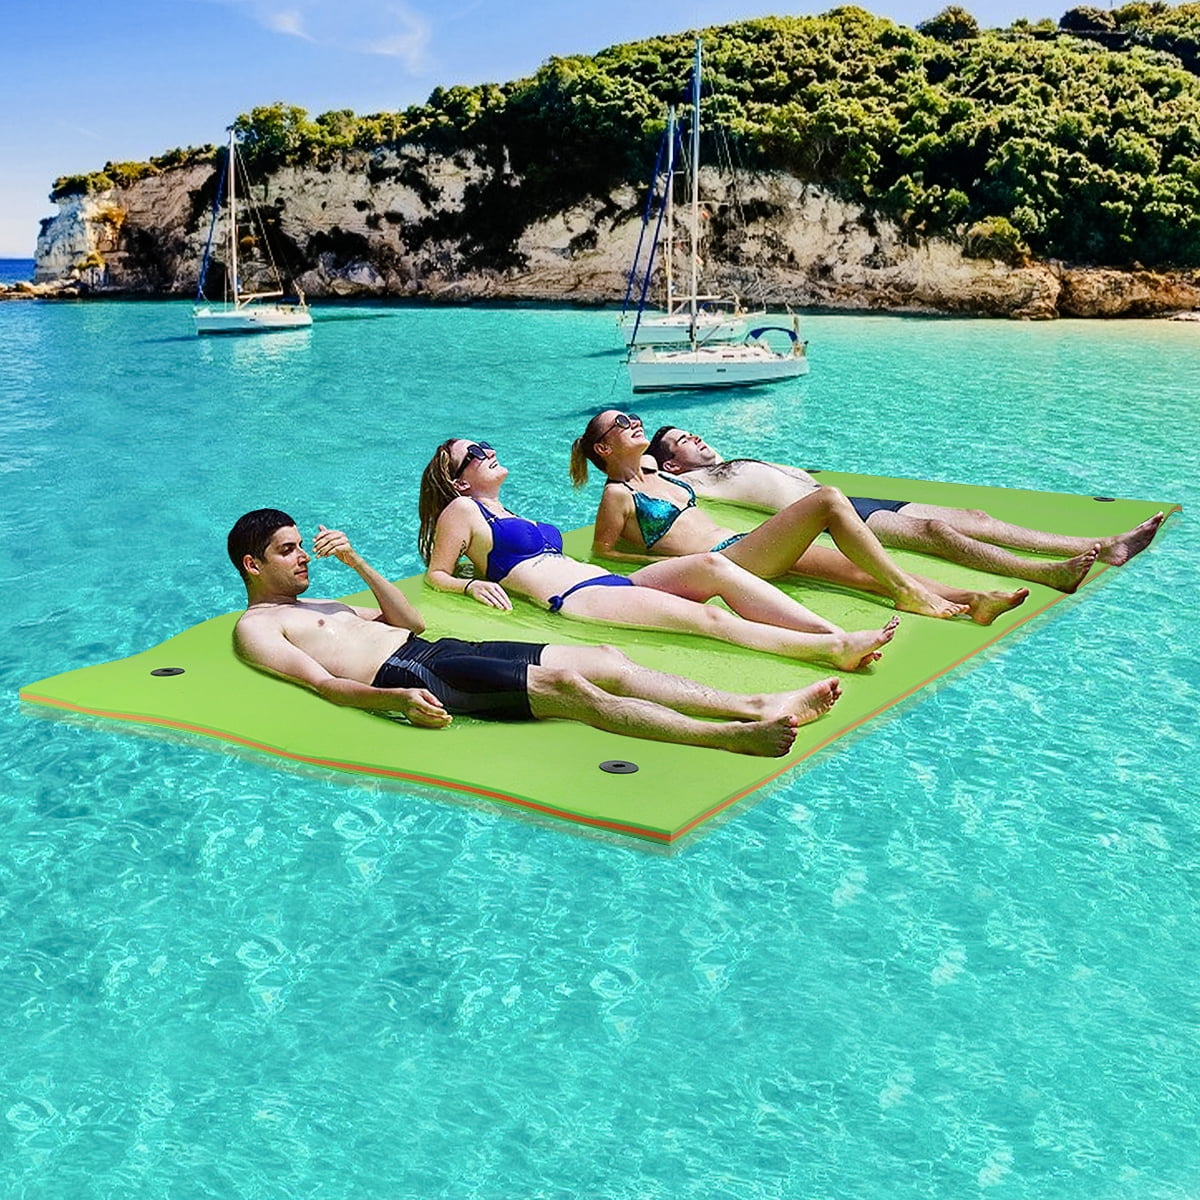 Tear-Resistant XPE Foam Island Bouncy and Durable Material Swimline Ultimate Super-Sized Floating Mattress Super Sized Floating Mat for Water Recreation and Relaxing 